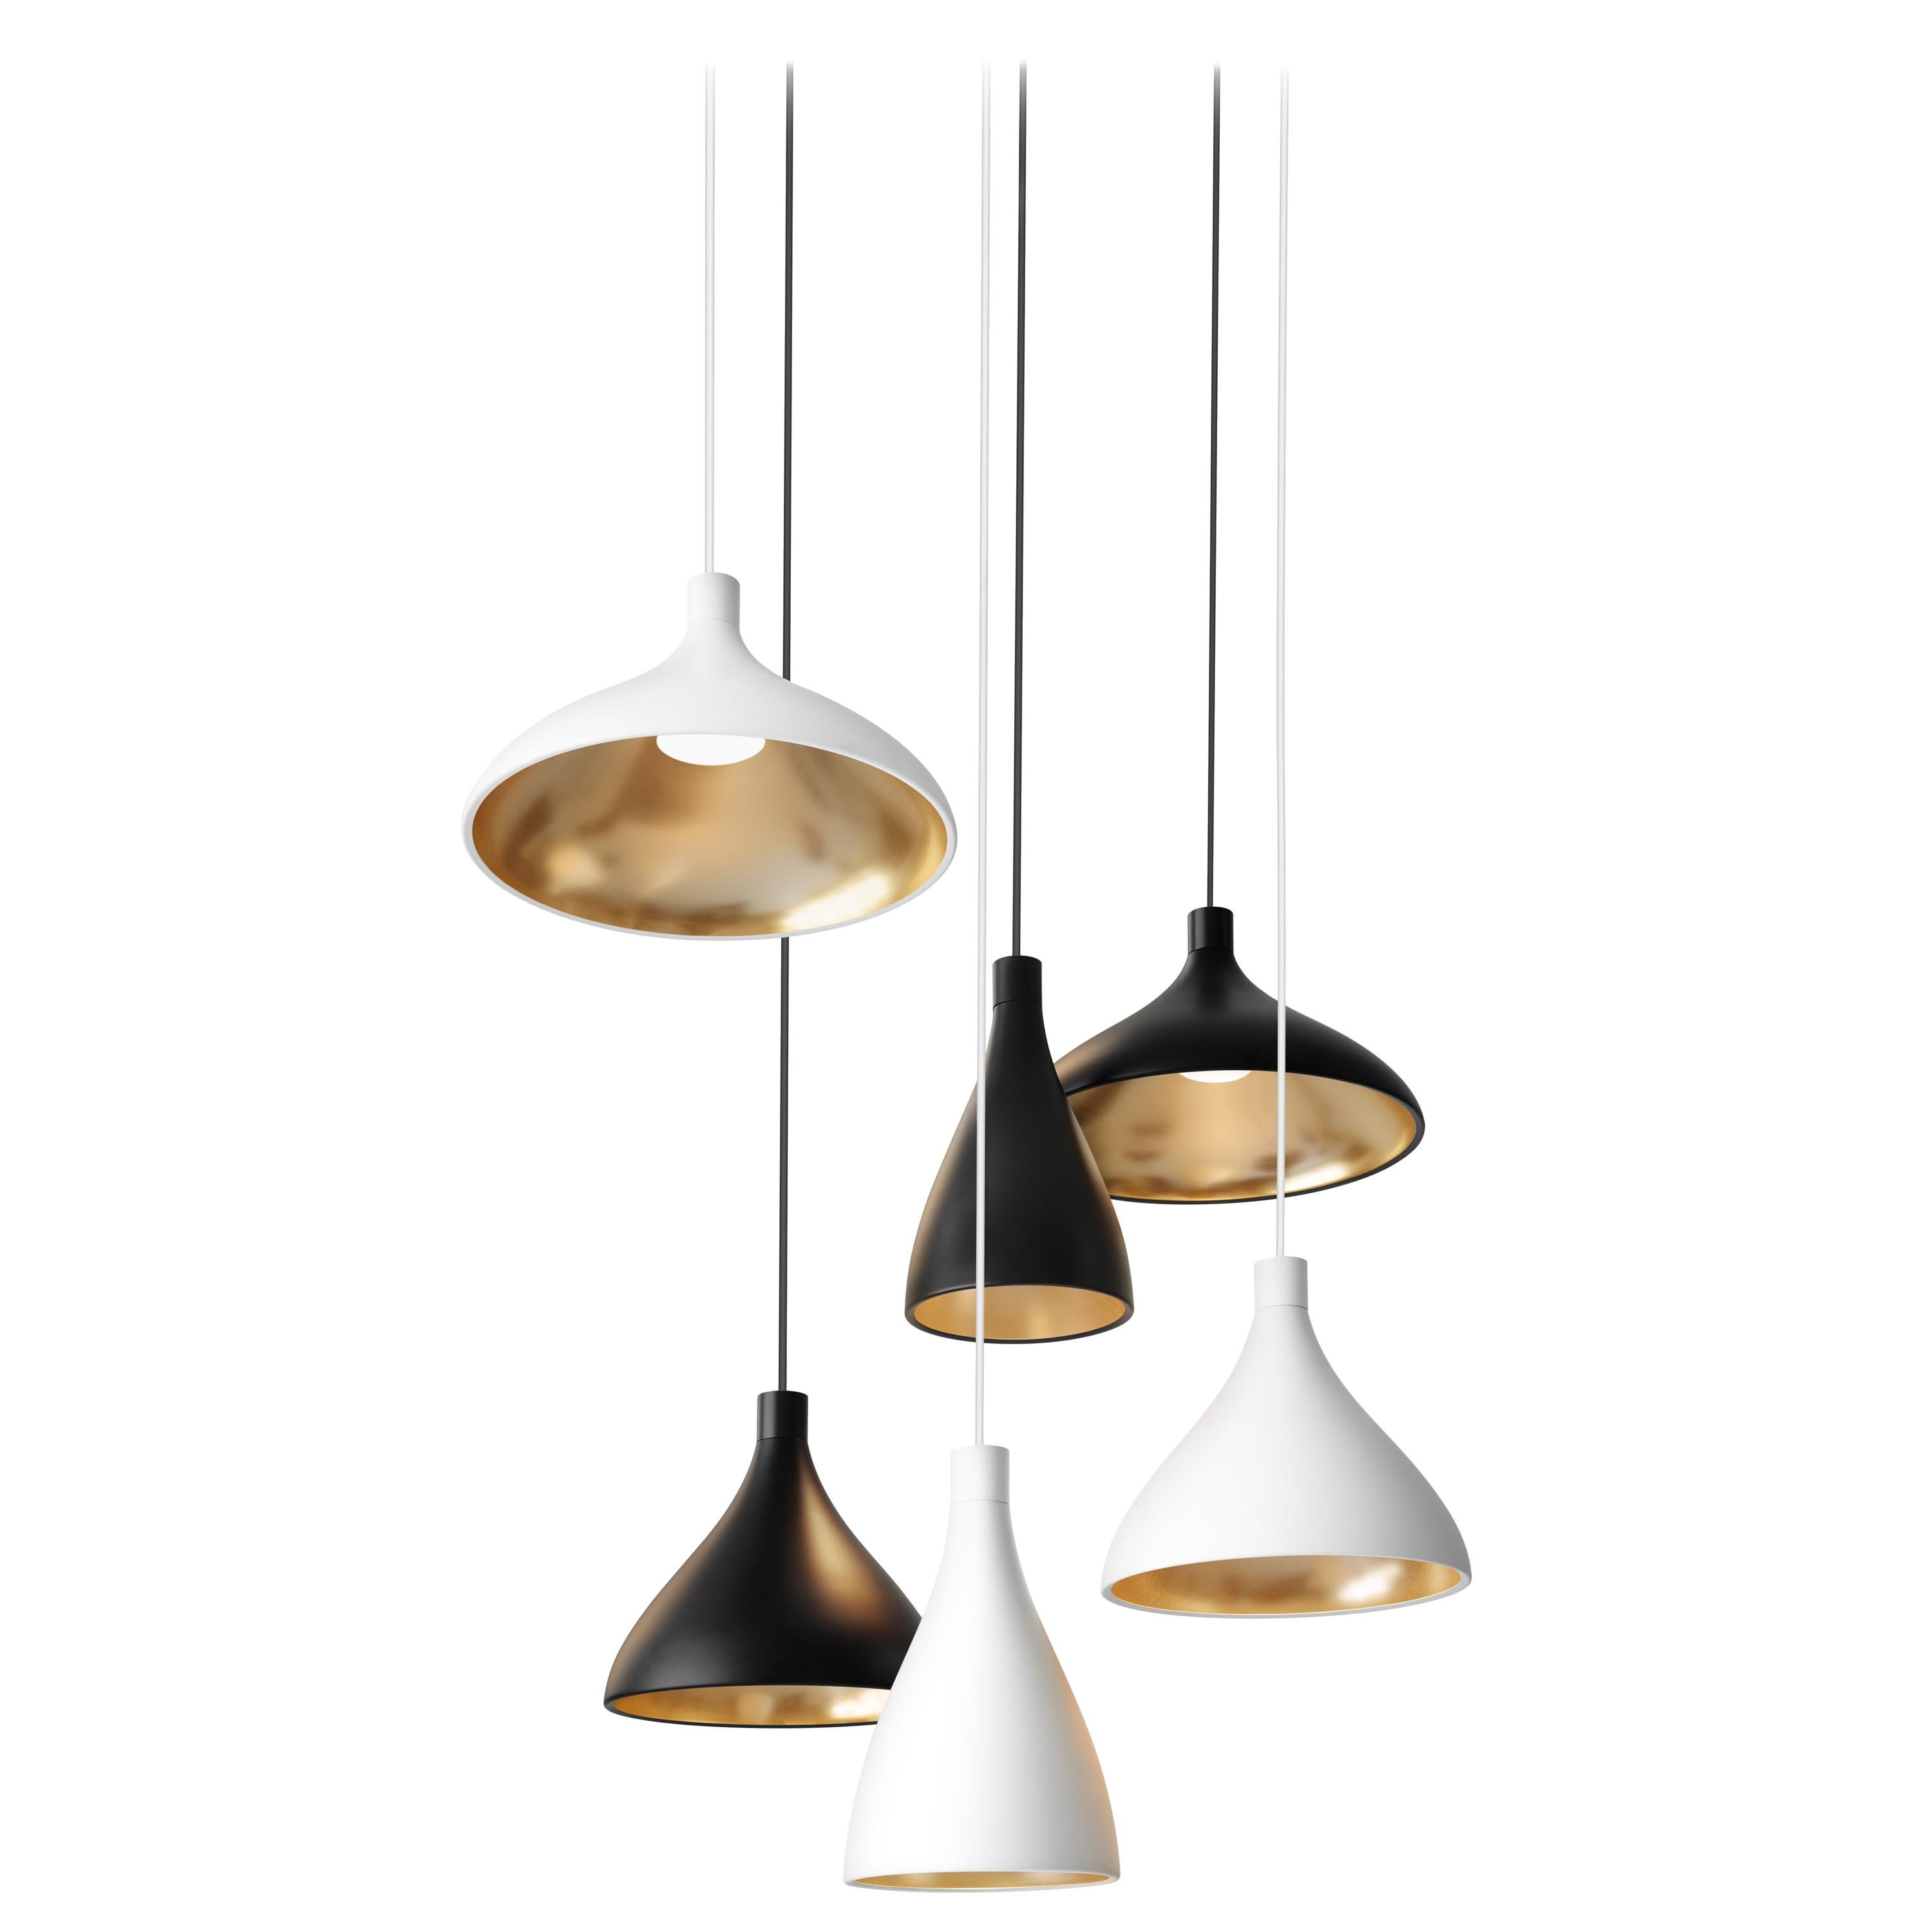 6-Piece Swell Chandelier in White and Brass with Canopy by Pablo Designs